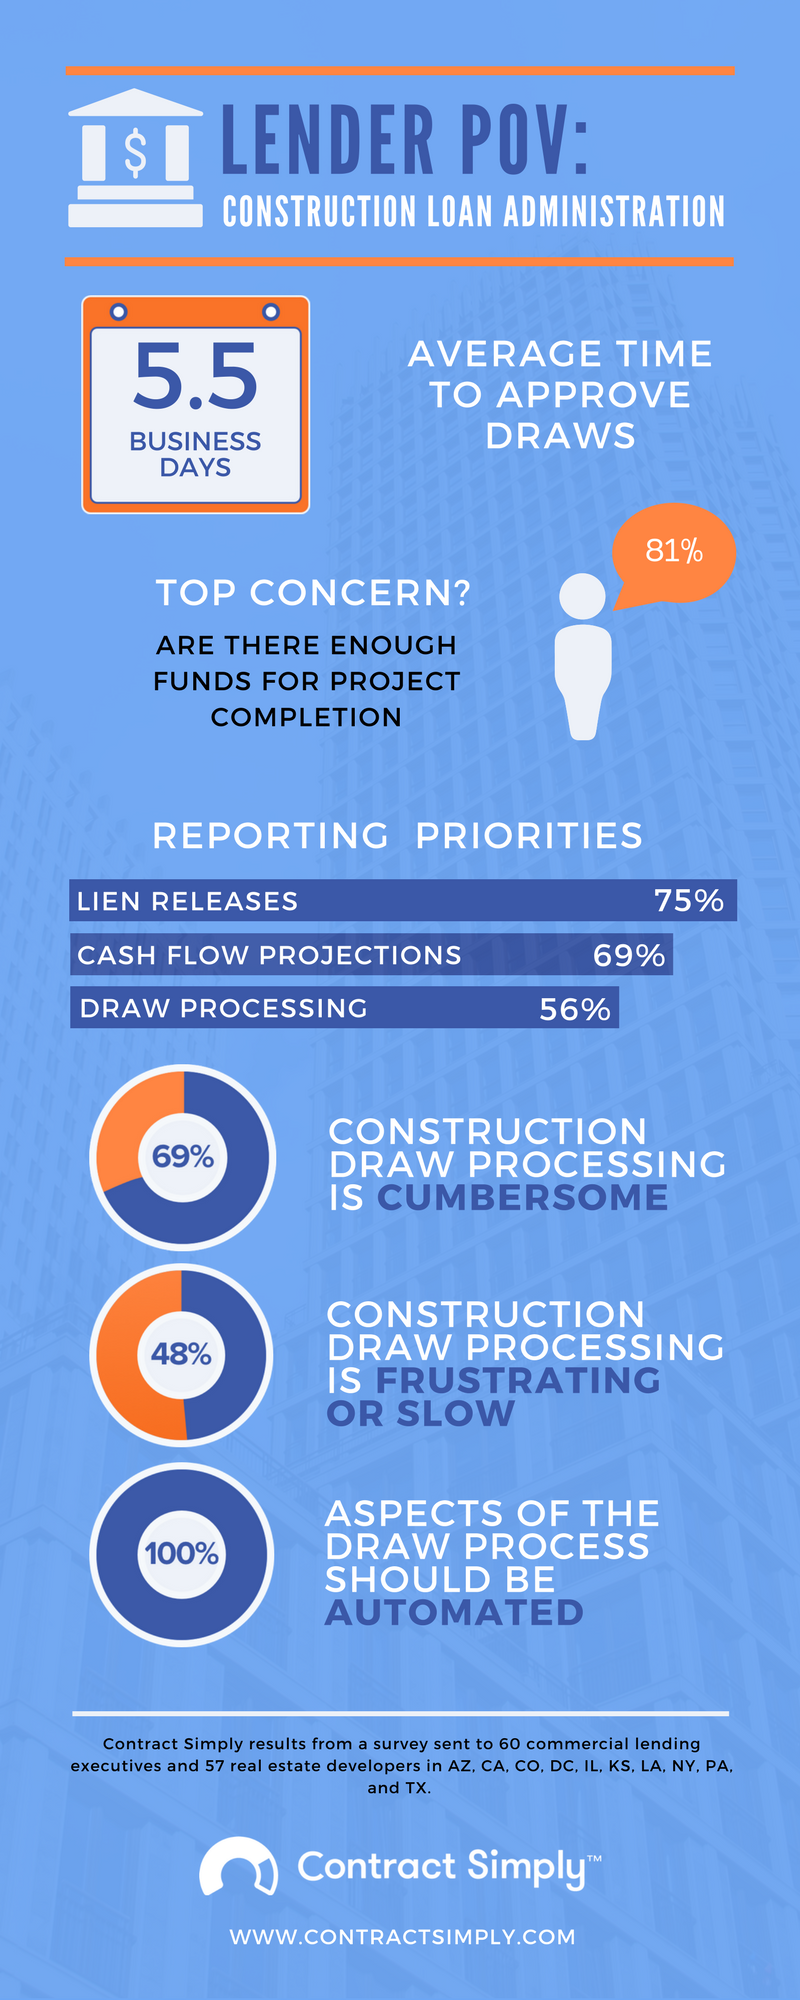 Contract Simply Construction Loan Administration Infographic - Lender